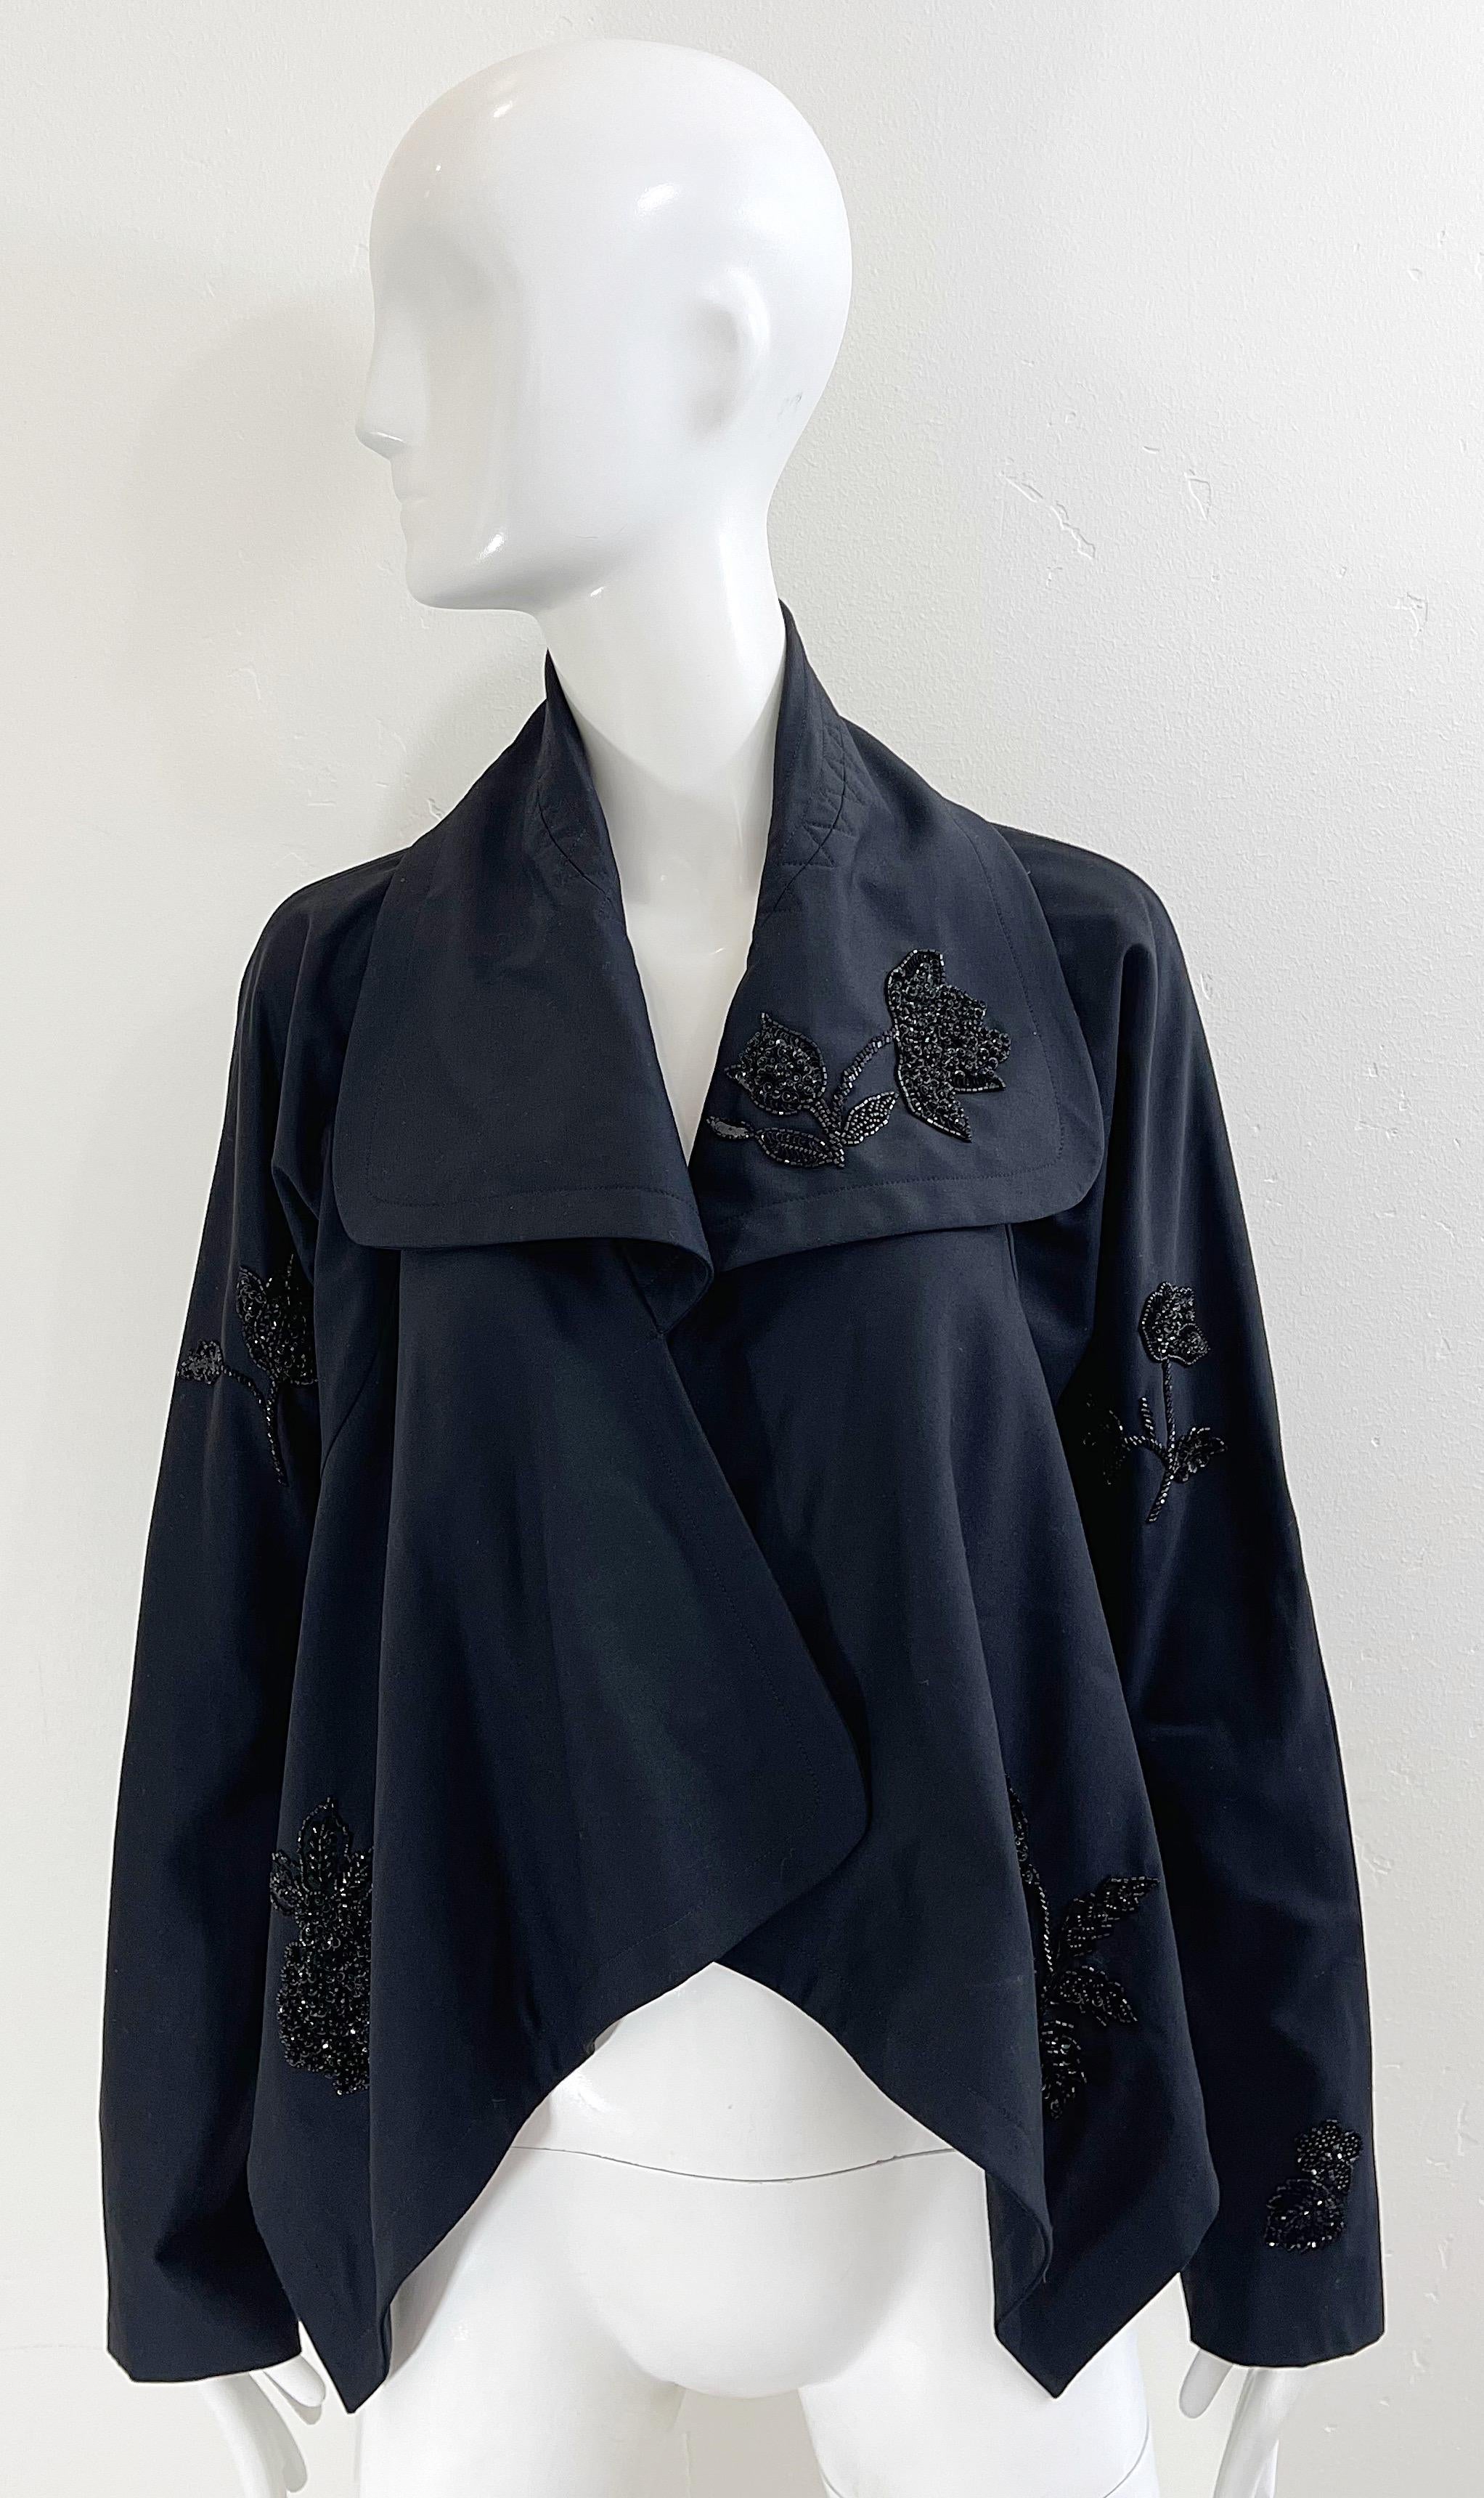 Beautiful early 2000s new with tags deadstock JOHN GALLIANO black beaded open front swing jacket ! Features hundreds of hand-sewn black beads throughout the entire jacket. The perfect layering piece for anytime of year. 
In great unworn condition,